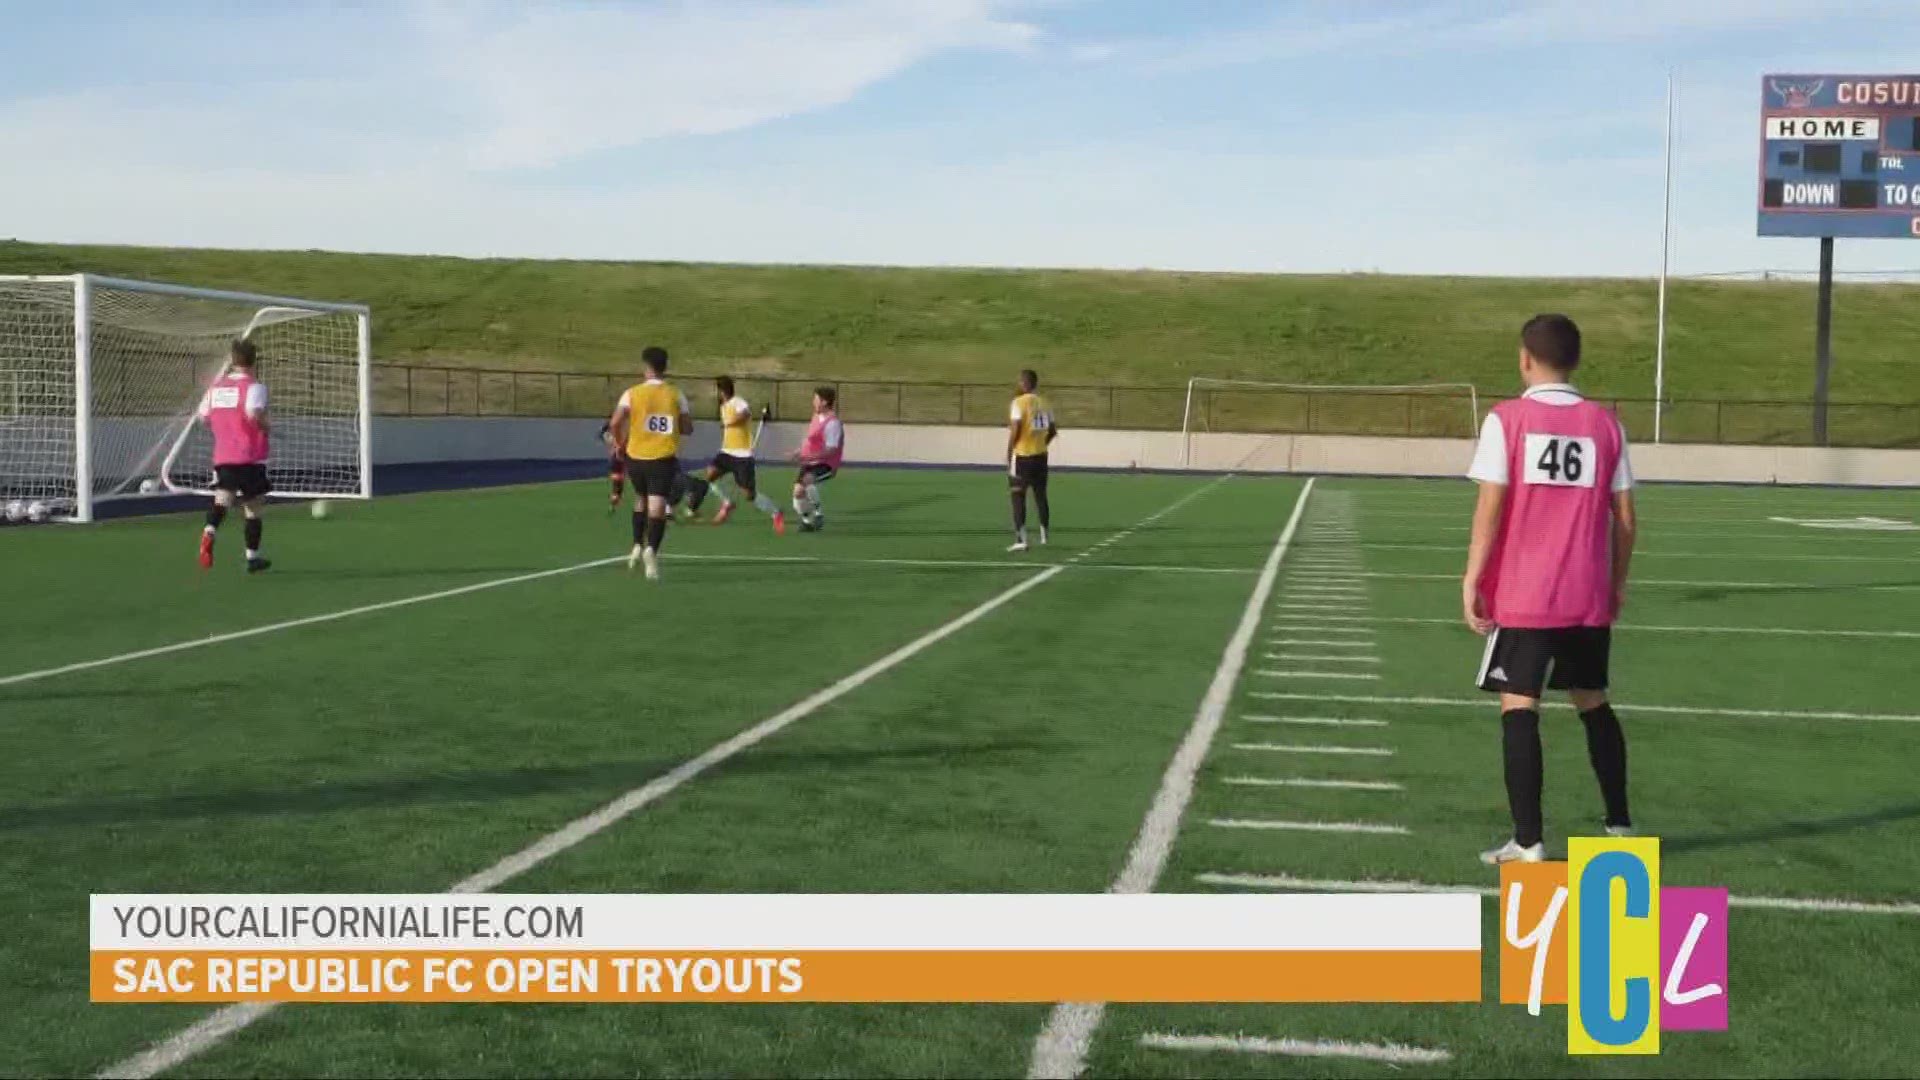 Head coach, Mark Briggs chats with Aubrey Aquino about Sac Republic’s upcoming open tryouts.